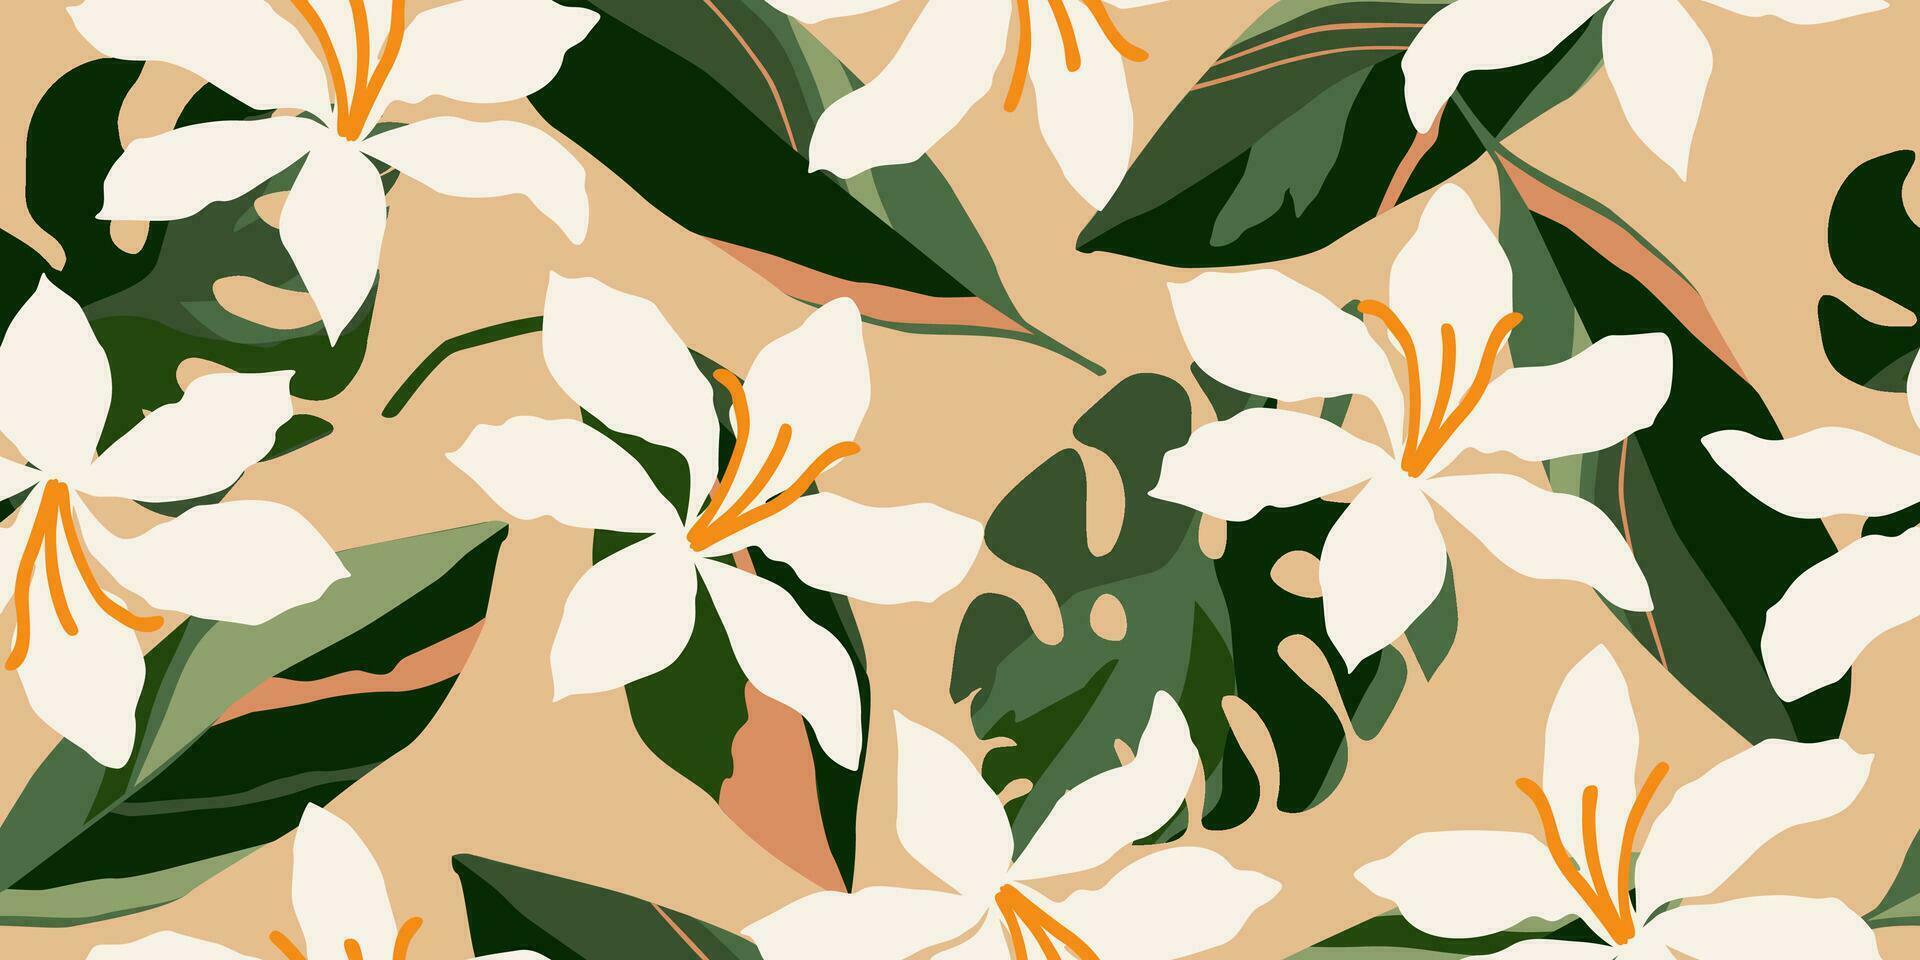 Hand drawn tropical flowers, seamless patterns with floral for fabric, textiles, clothing, wrapping paper, cover, banner, interior decor, abstract backgrounds. vector illustration.